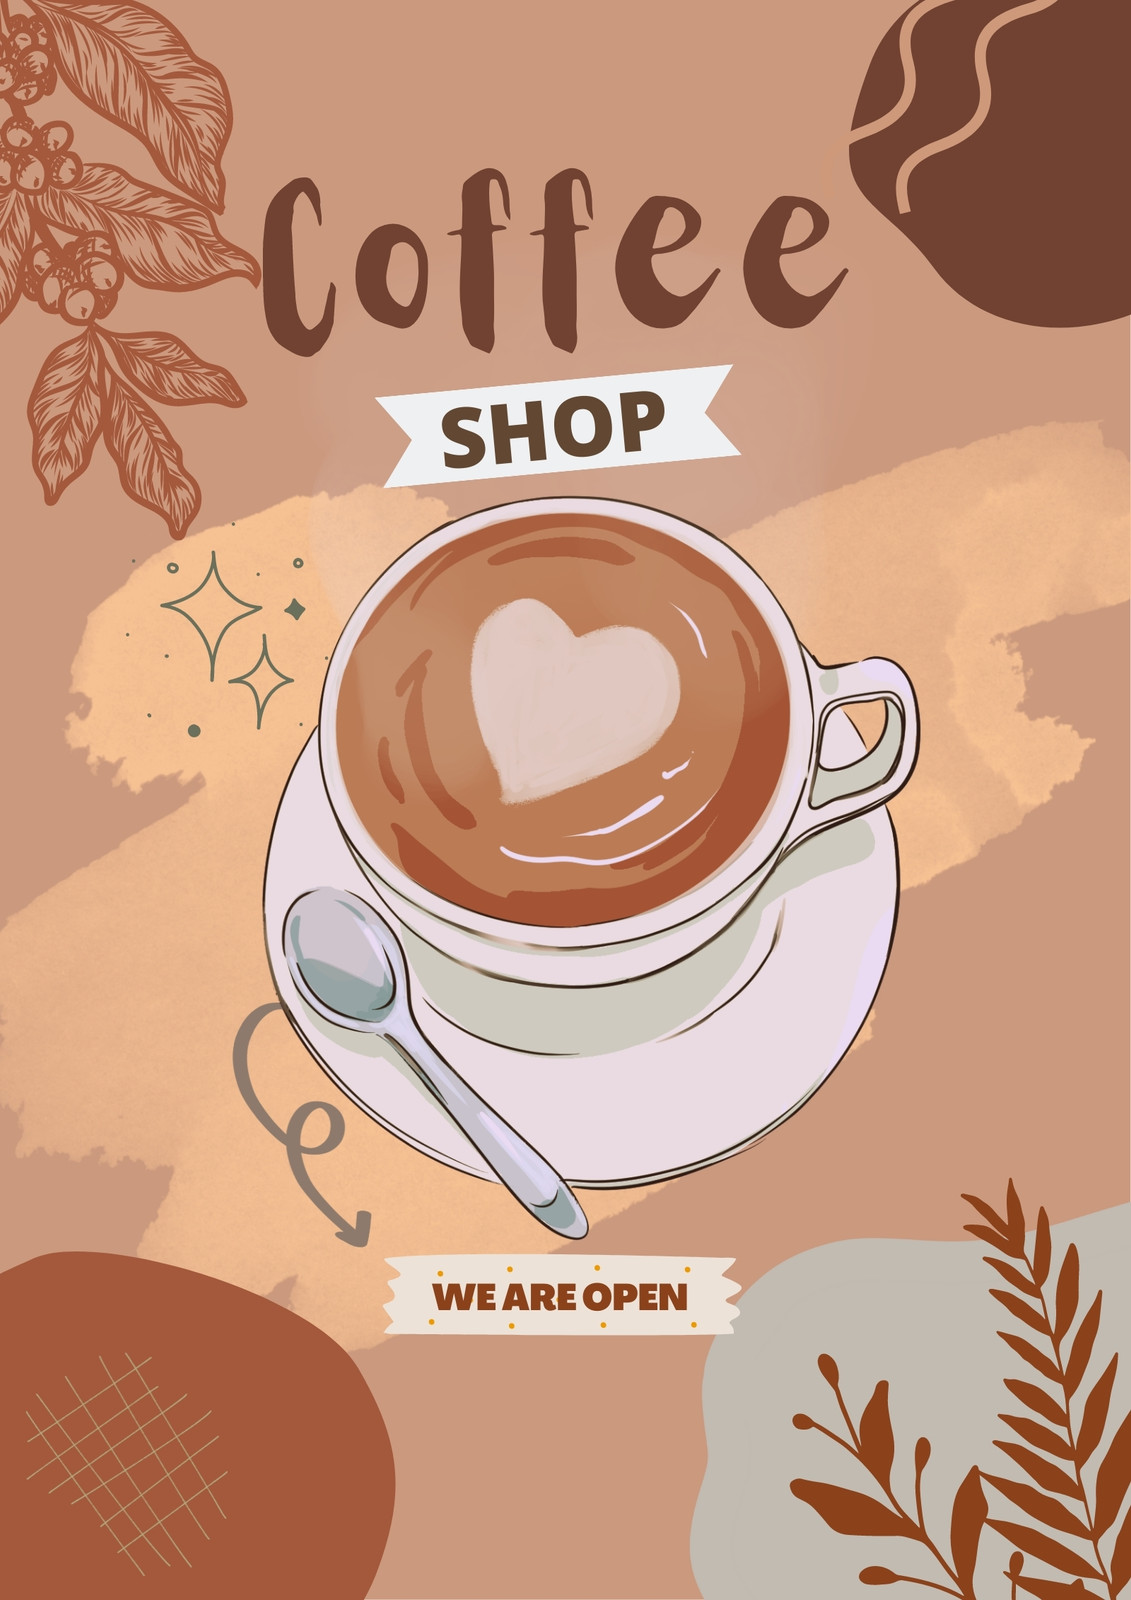 Free and customizable cafe templates